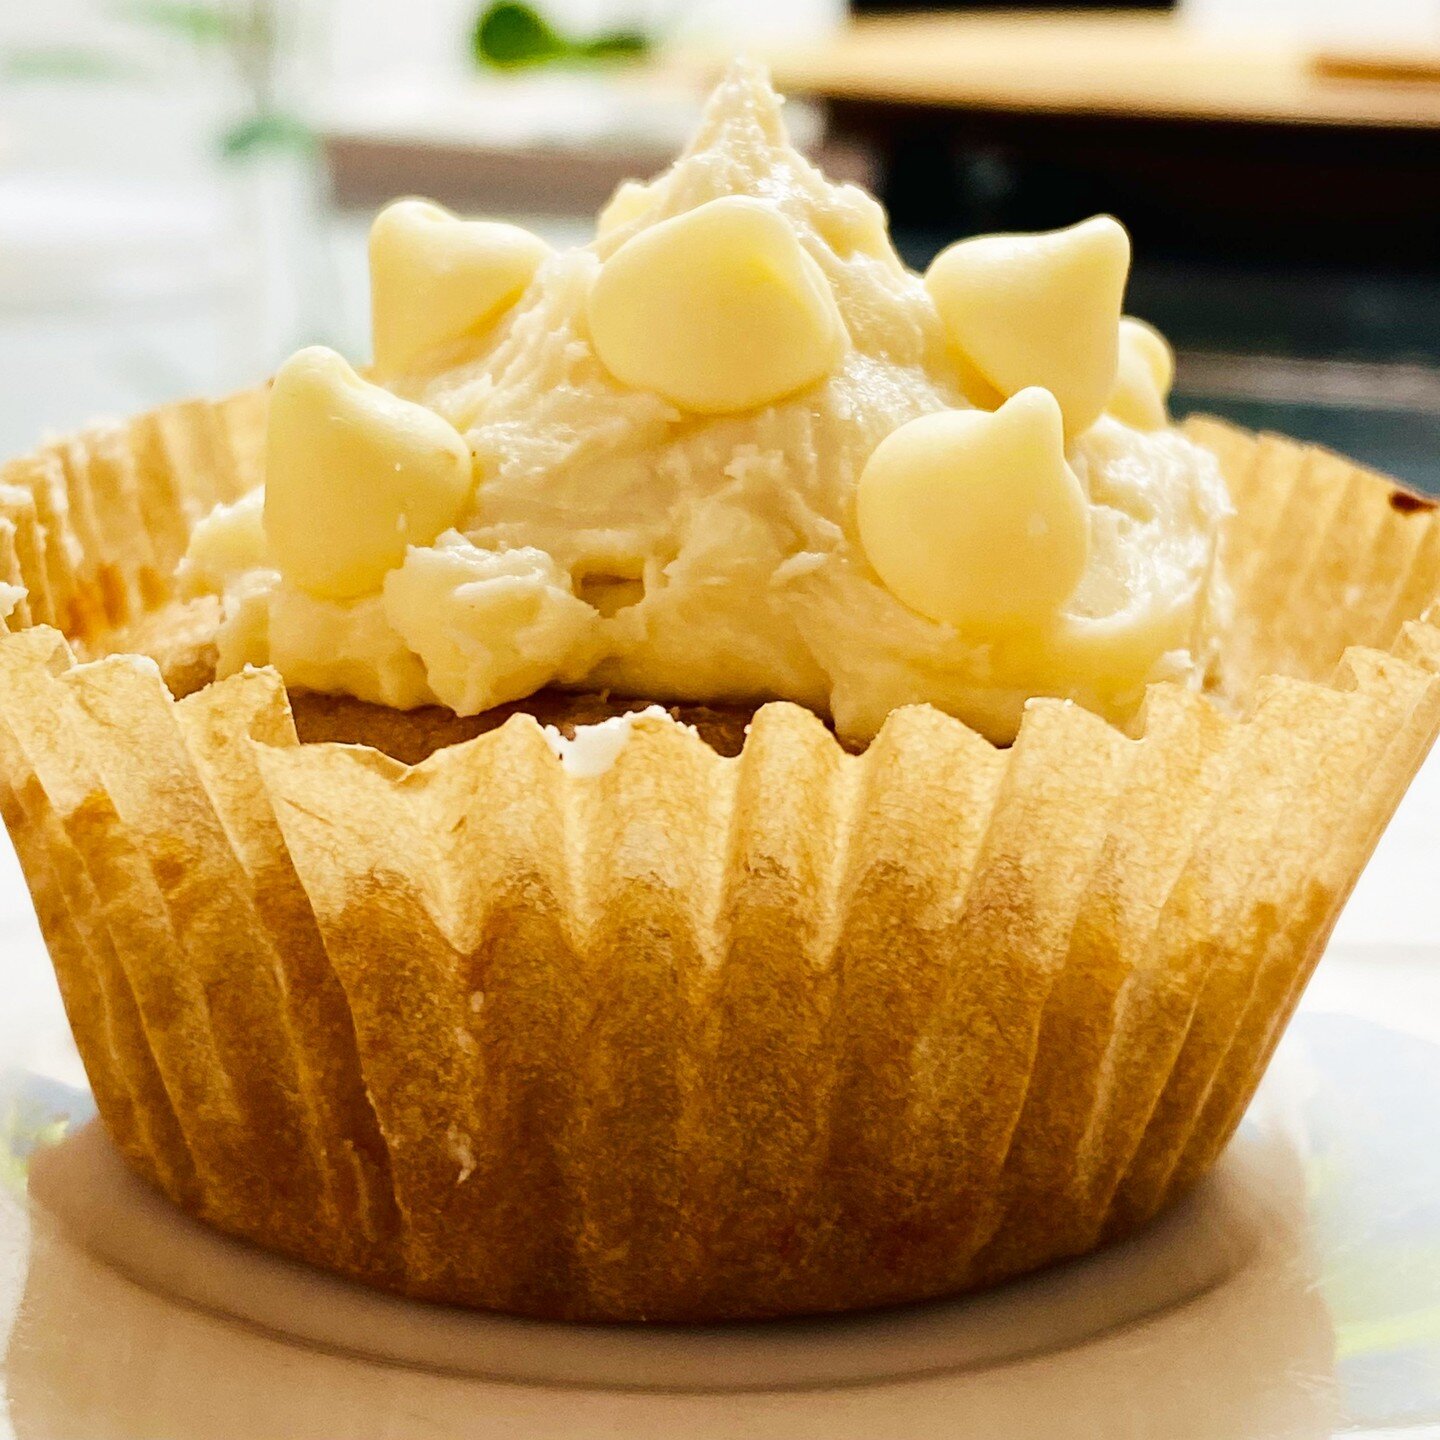 Hello, crown community! I was scrolling on the internet when I found a recipe for white chocolate ganache cupcakes--of course I had to make them! I started by baking a vanilla cupcake and filling it with ganache. You can see how the handmade white ch